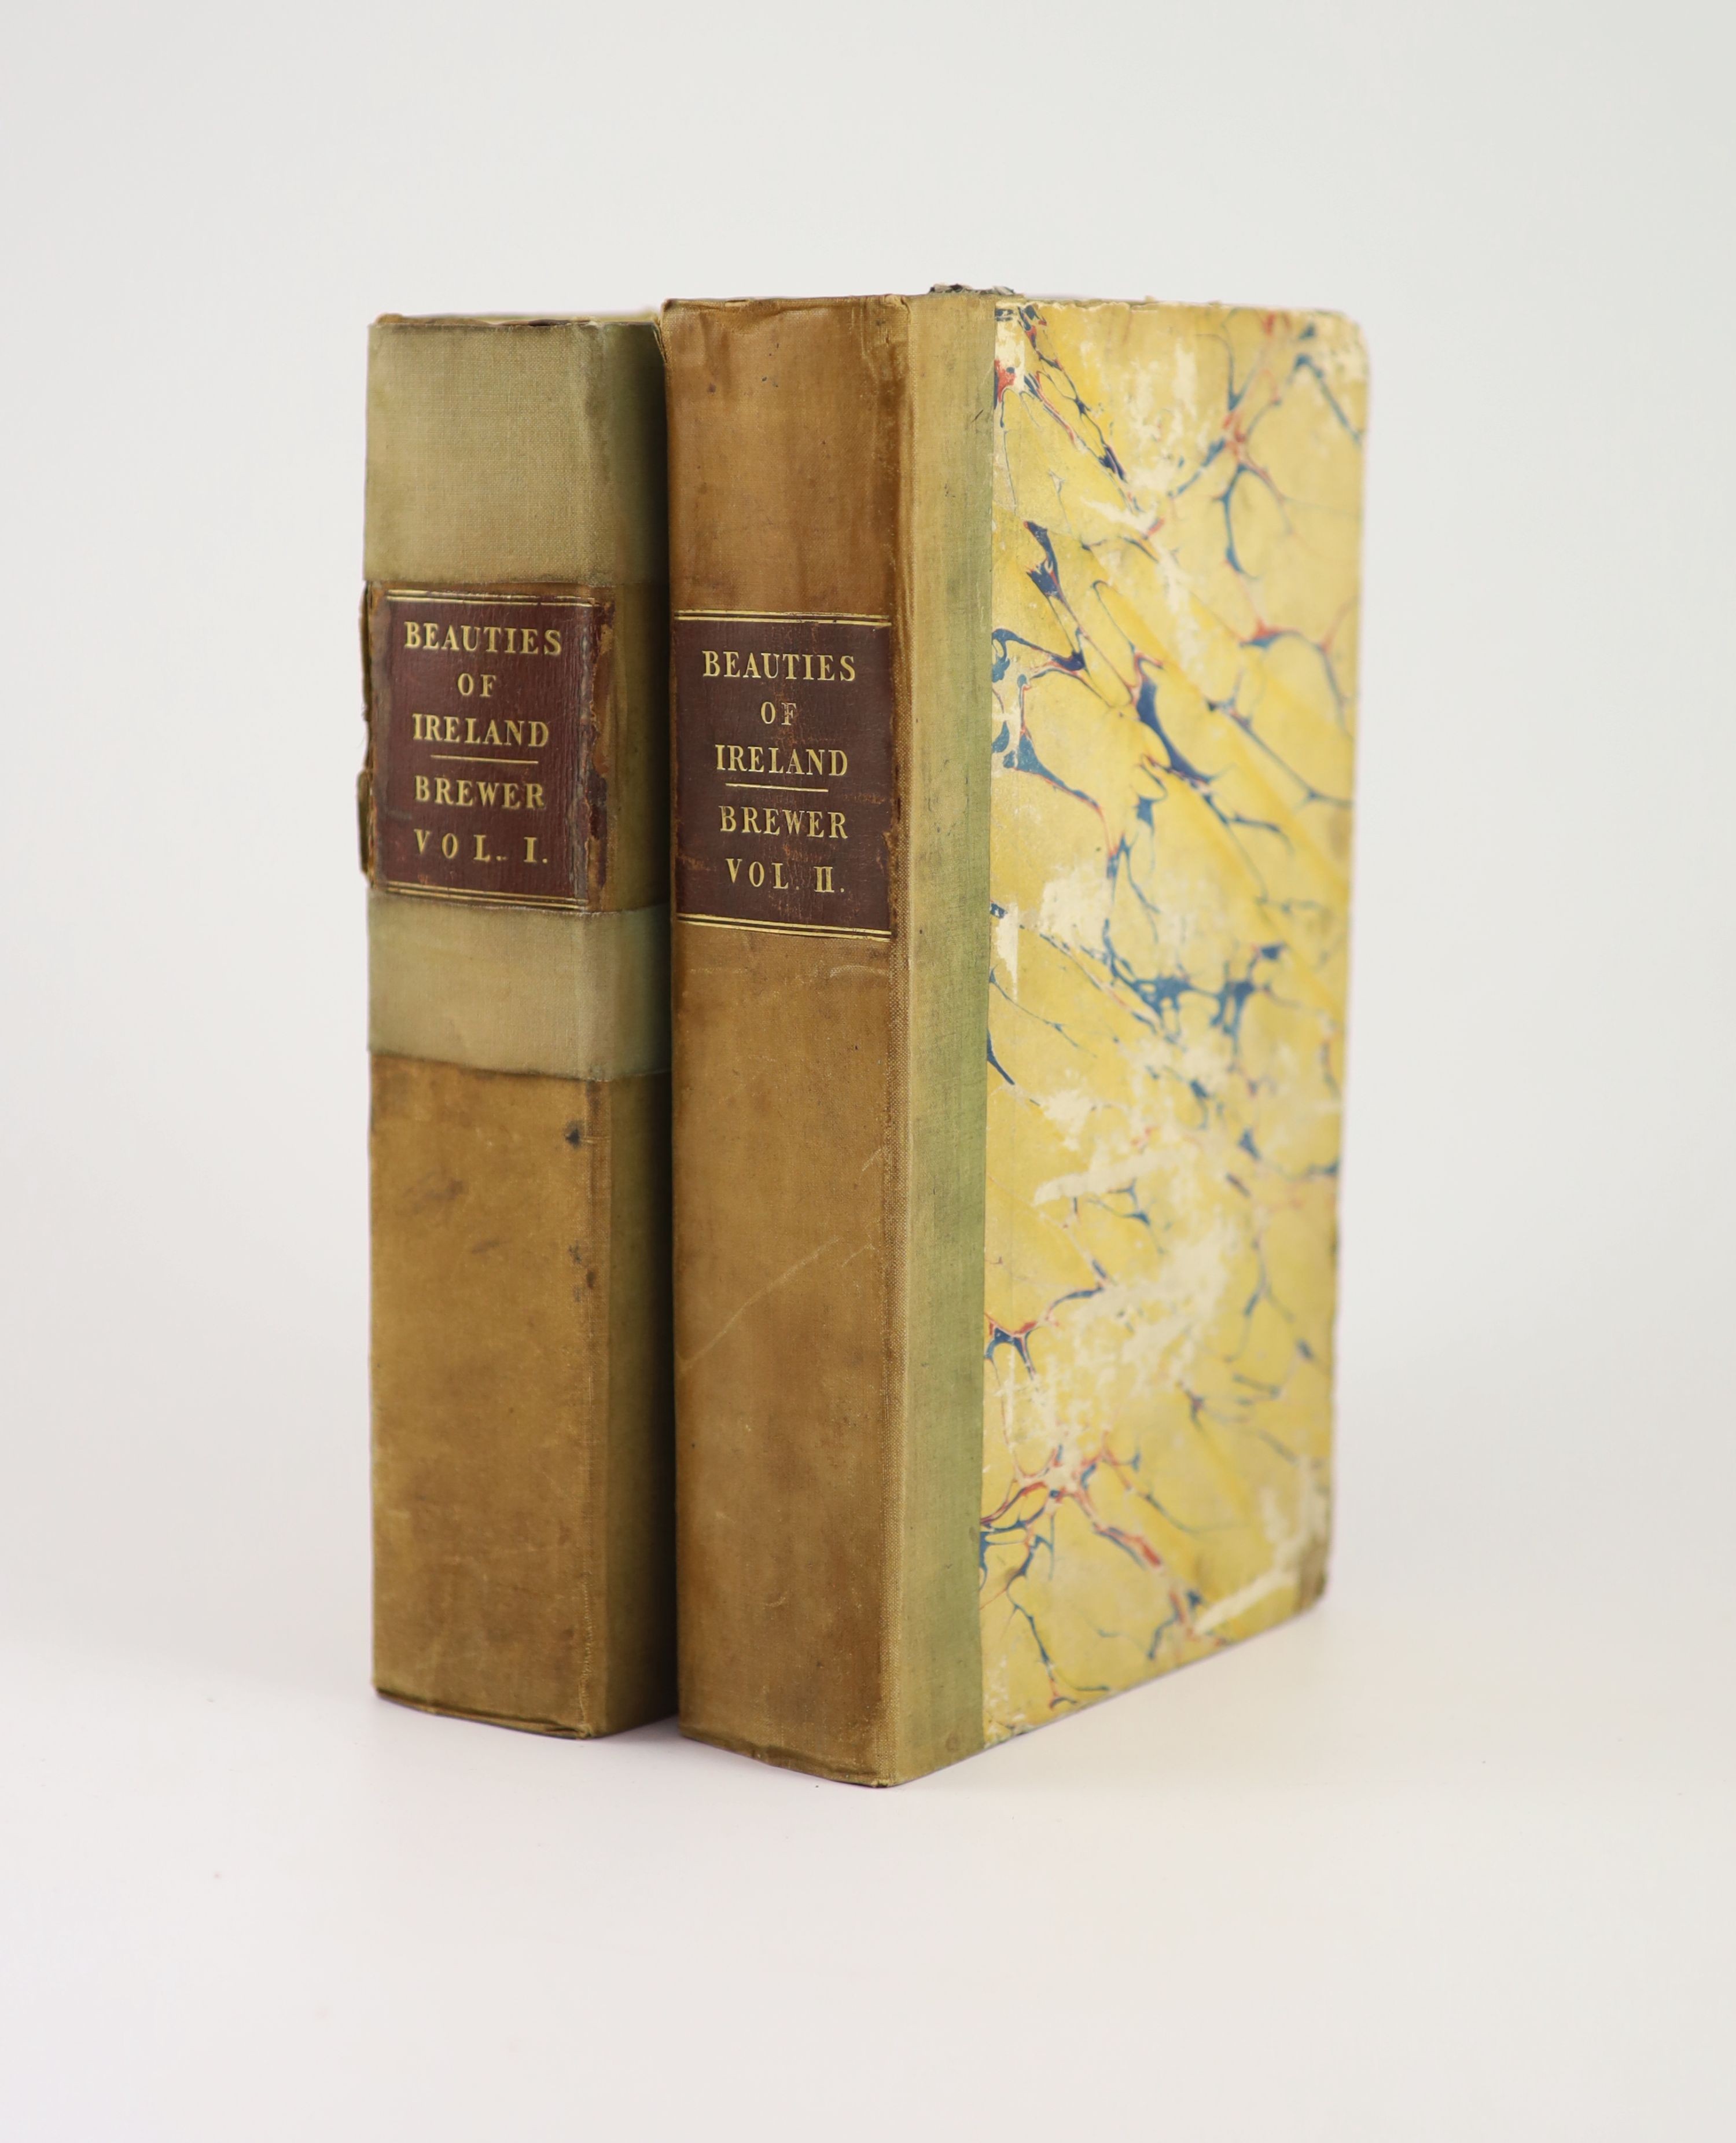 Brewer, James Norris - The Beauties of Ireland, 2 vols, 8vo, quarter cloth, spines sunned and poorly repaired, with 2 frontispieces and 2 plates, Sherwood, Jones & Co., London, 1825-26